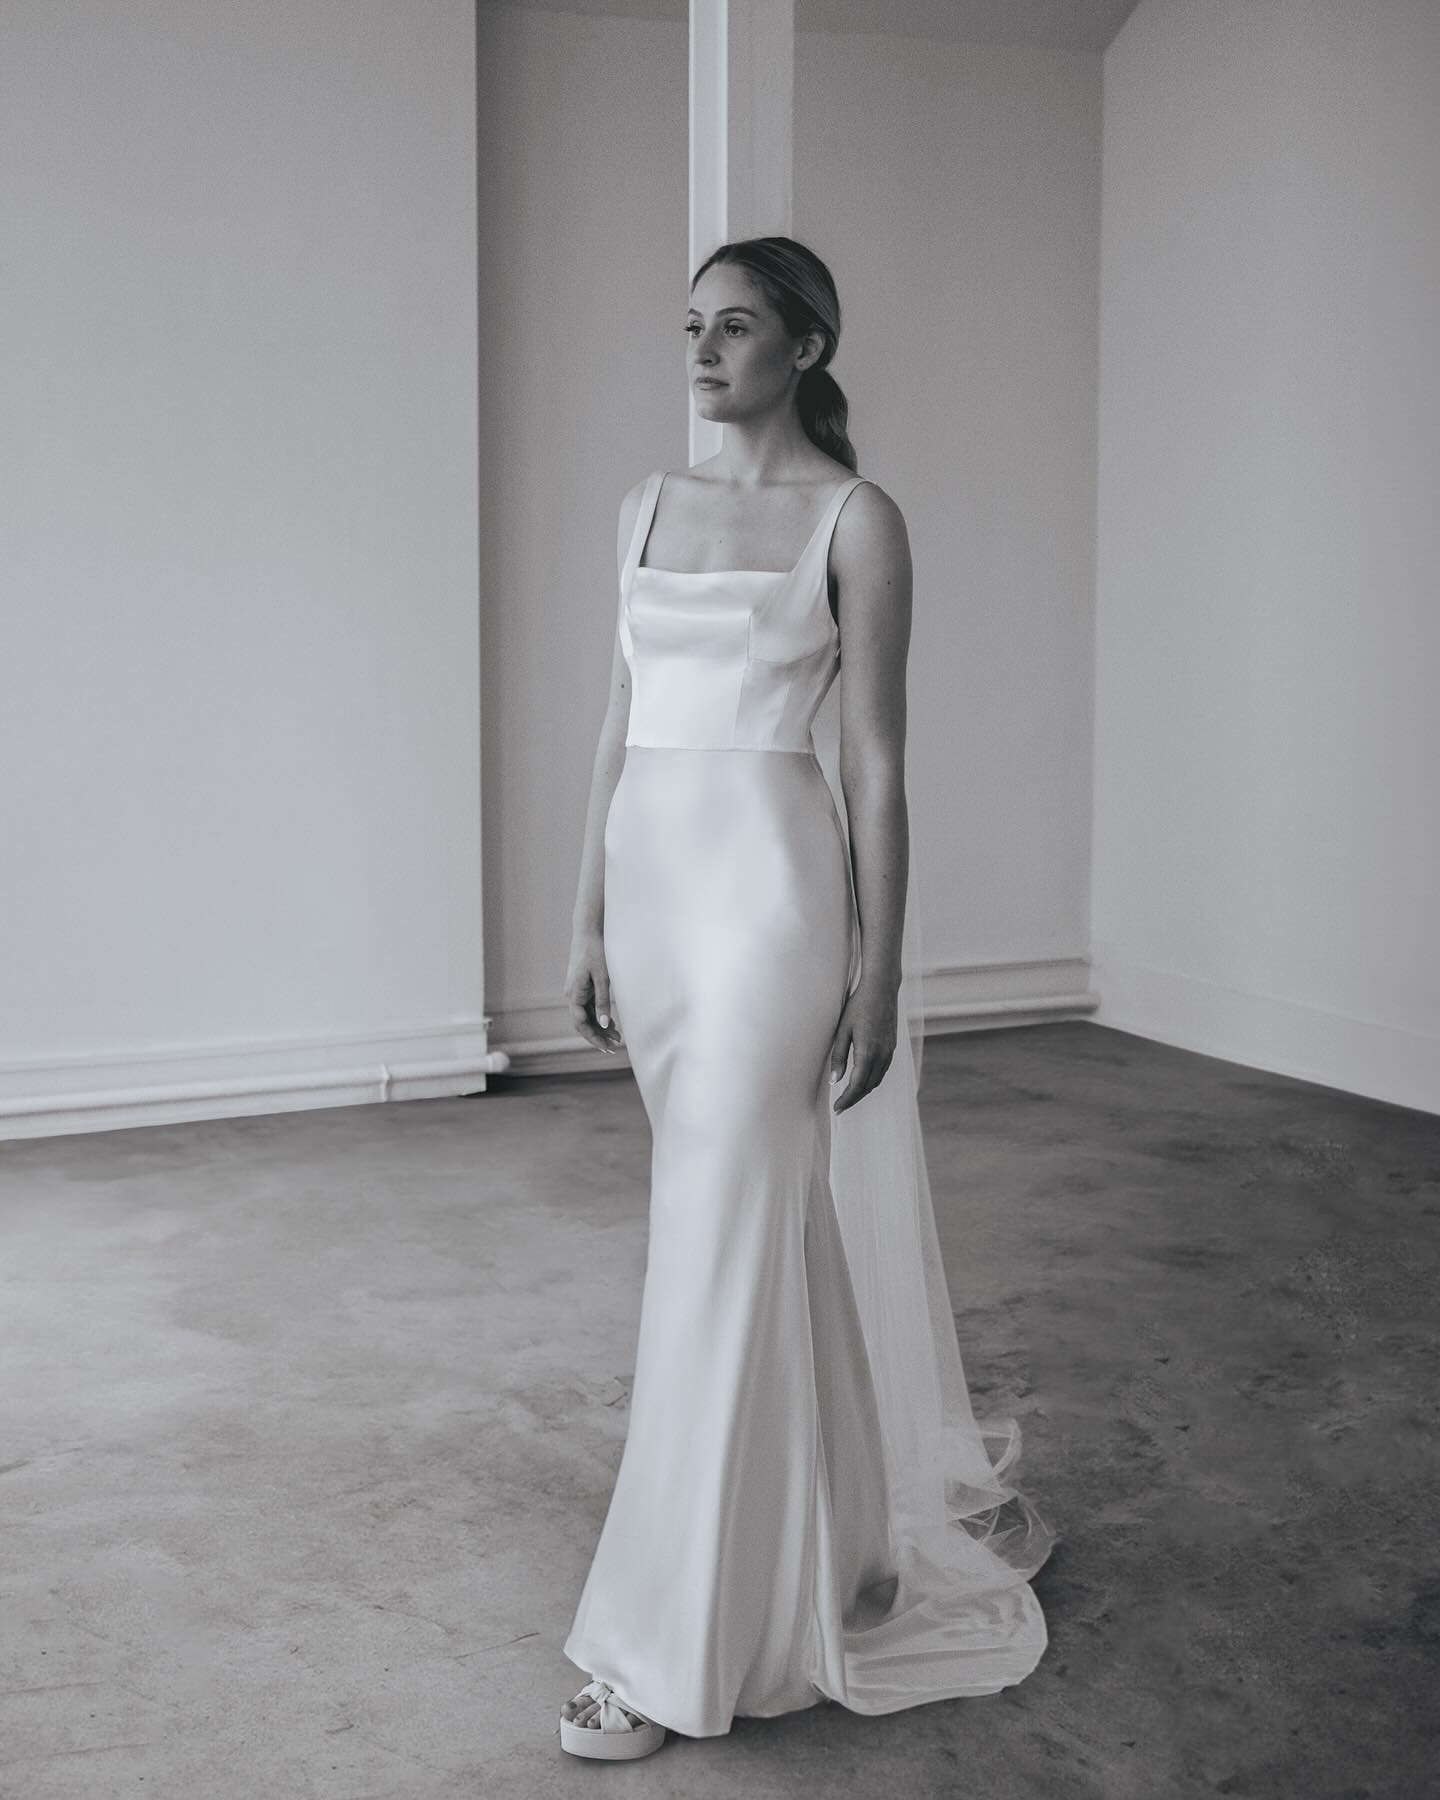 Clara dress appreciation &hearts;️ 
Liquid luxury silk&mdash;satin | a flattering structured bodice | modern square neckline | bias cut skirt ~ and effortlessly paired with the beautiful Emmie, a sheer silk organza top for 𝘛𝘞𝘖 bridal looks. Both p